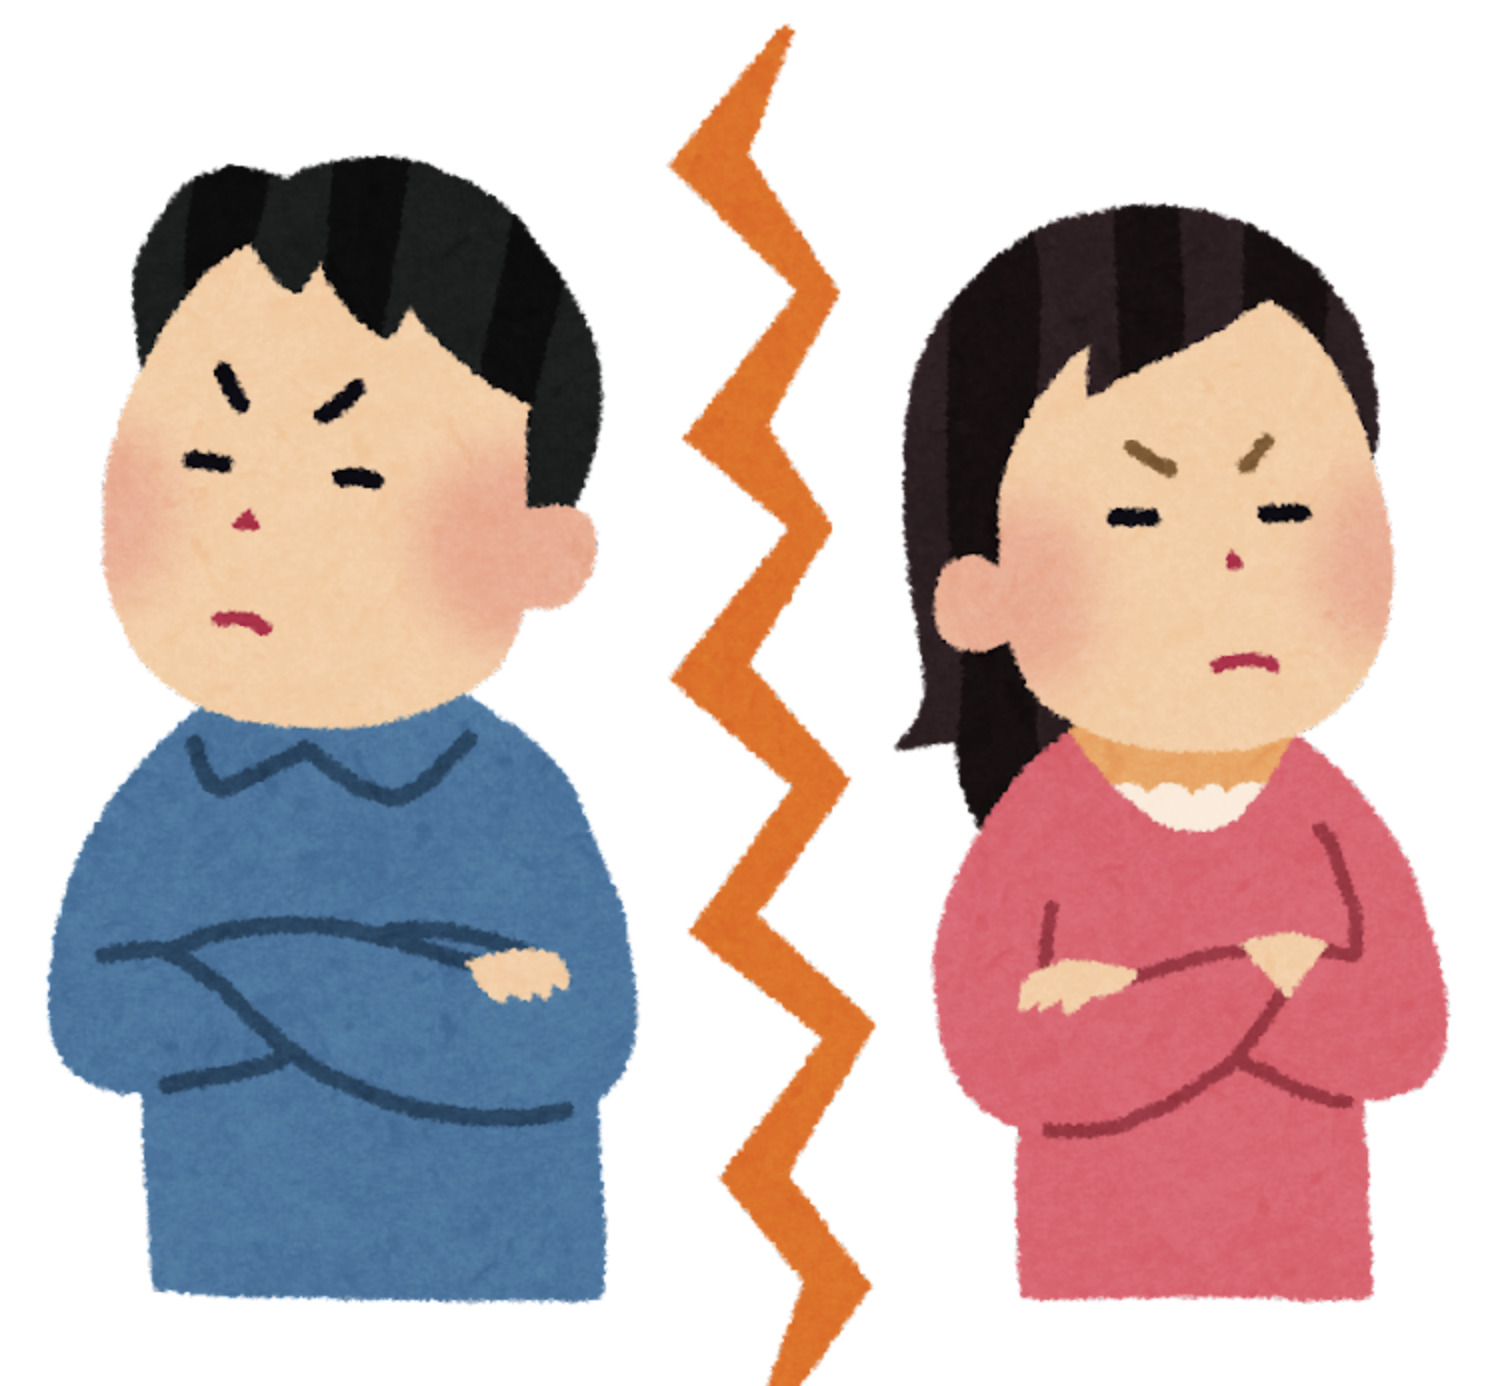 Reasons for the high divorce rate of international marriages in Japan